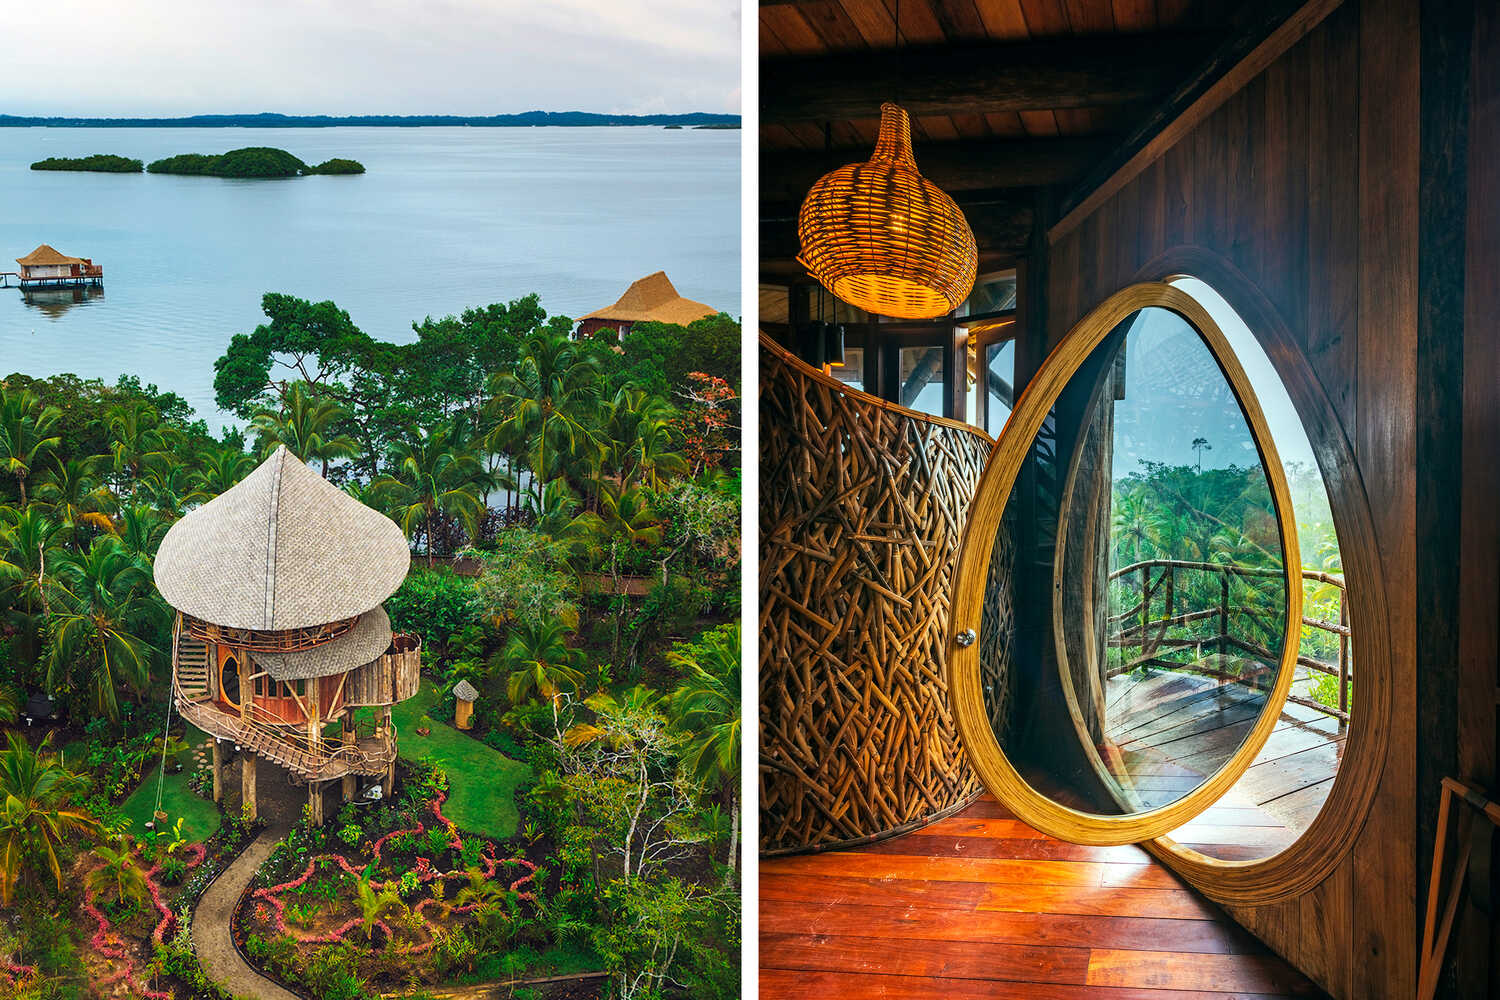 Left: At Nayara Bocas del Toro resort, located on an island off Panama’s Caribbean coast, guests can choose between staying in a treehouse or an overwater villa. Right: An egg-shaped door leads into the treehouse’s enclosed bedroom.